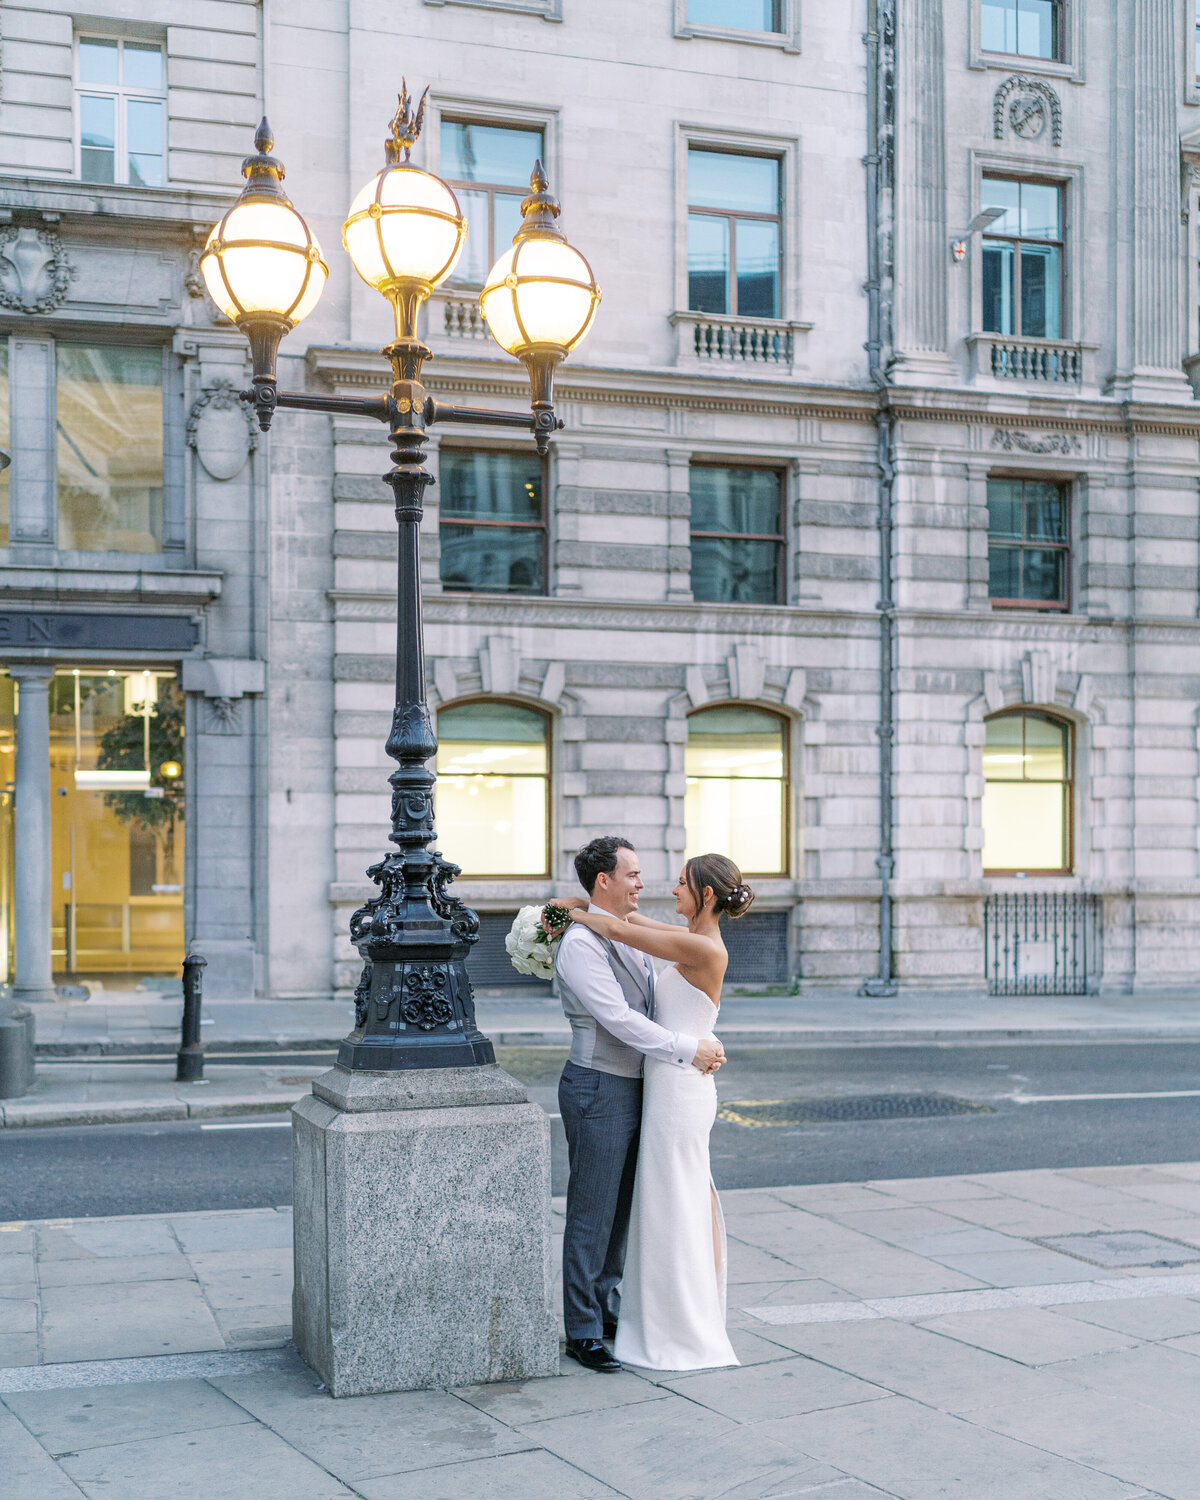 Bride and groom in London for golden hour wedding portraits